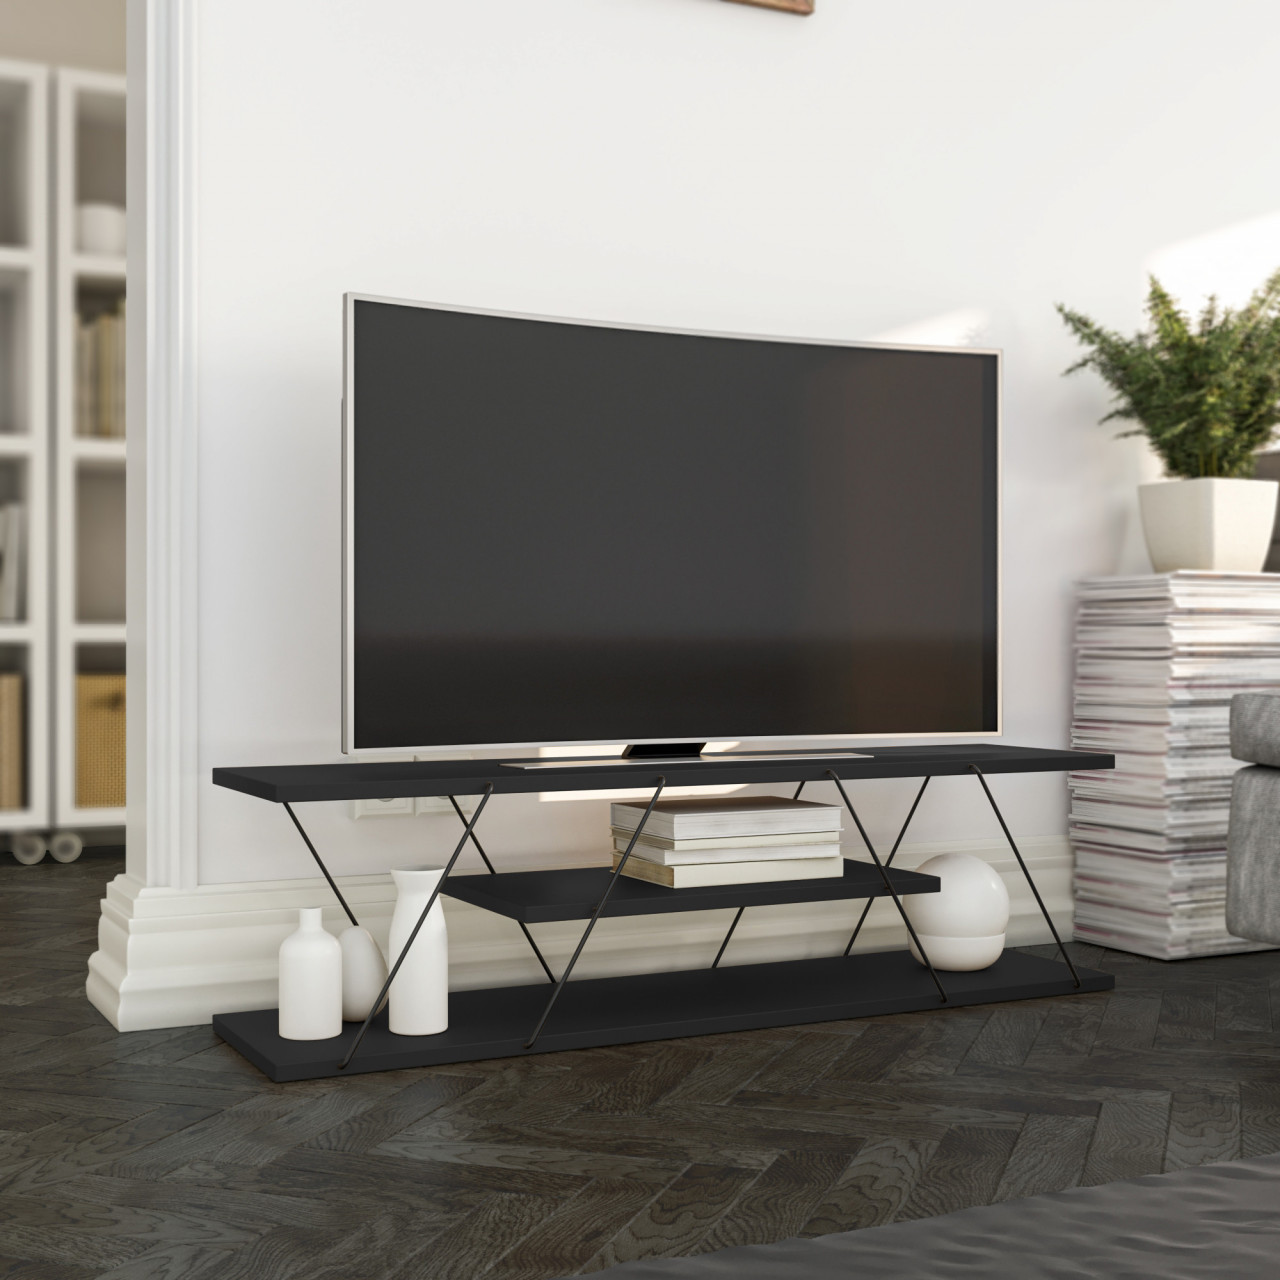 Suport TV Canaz - Anthracite, Grey